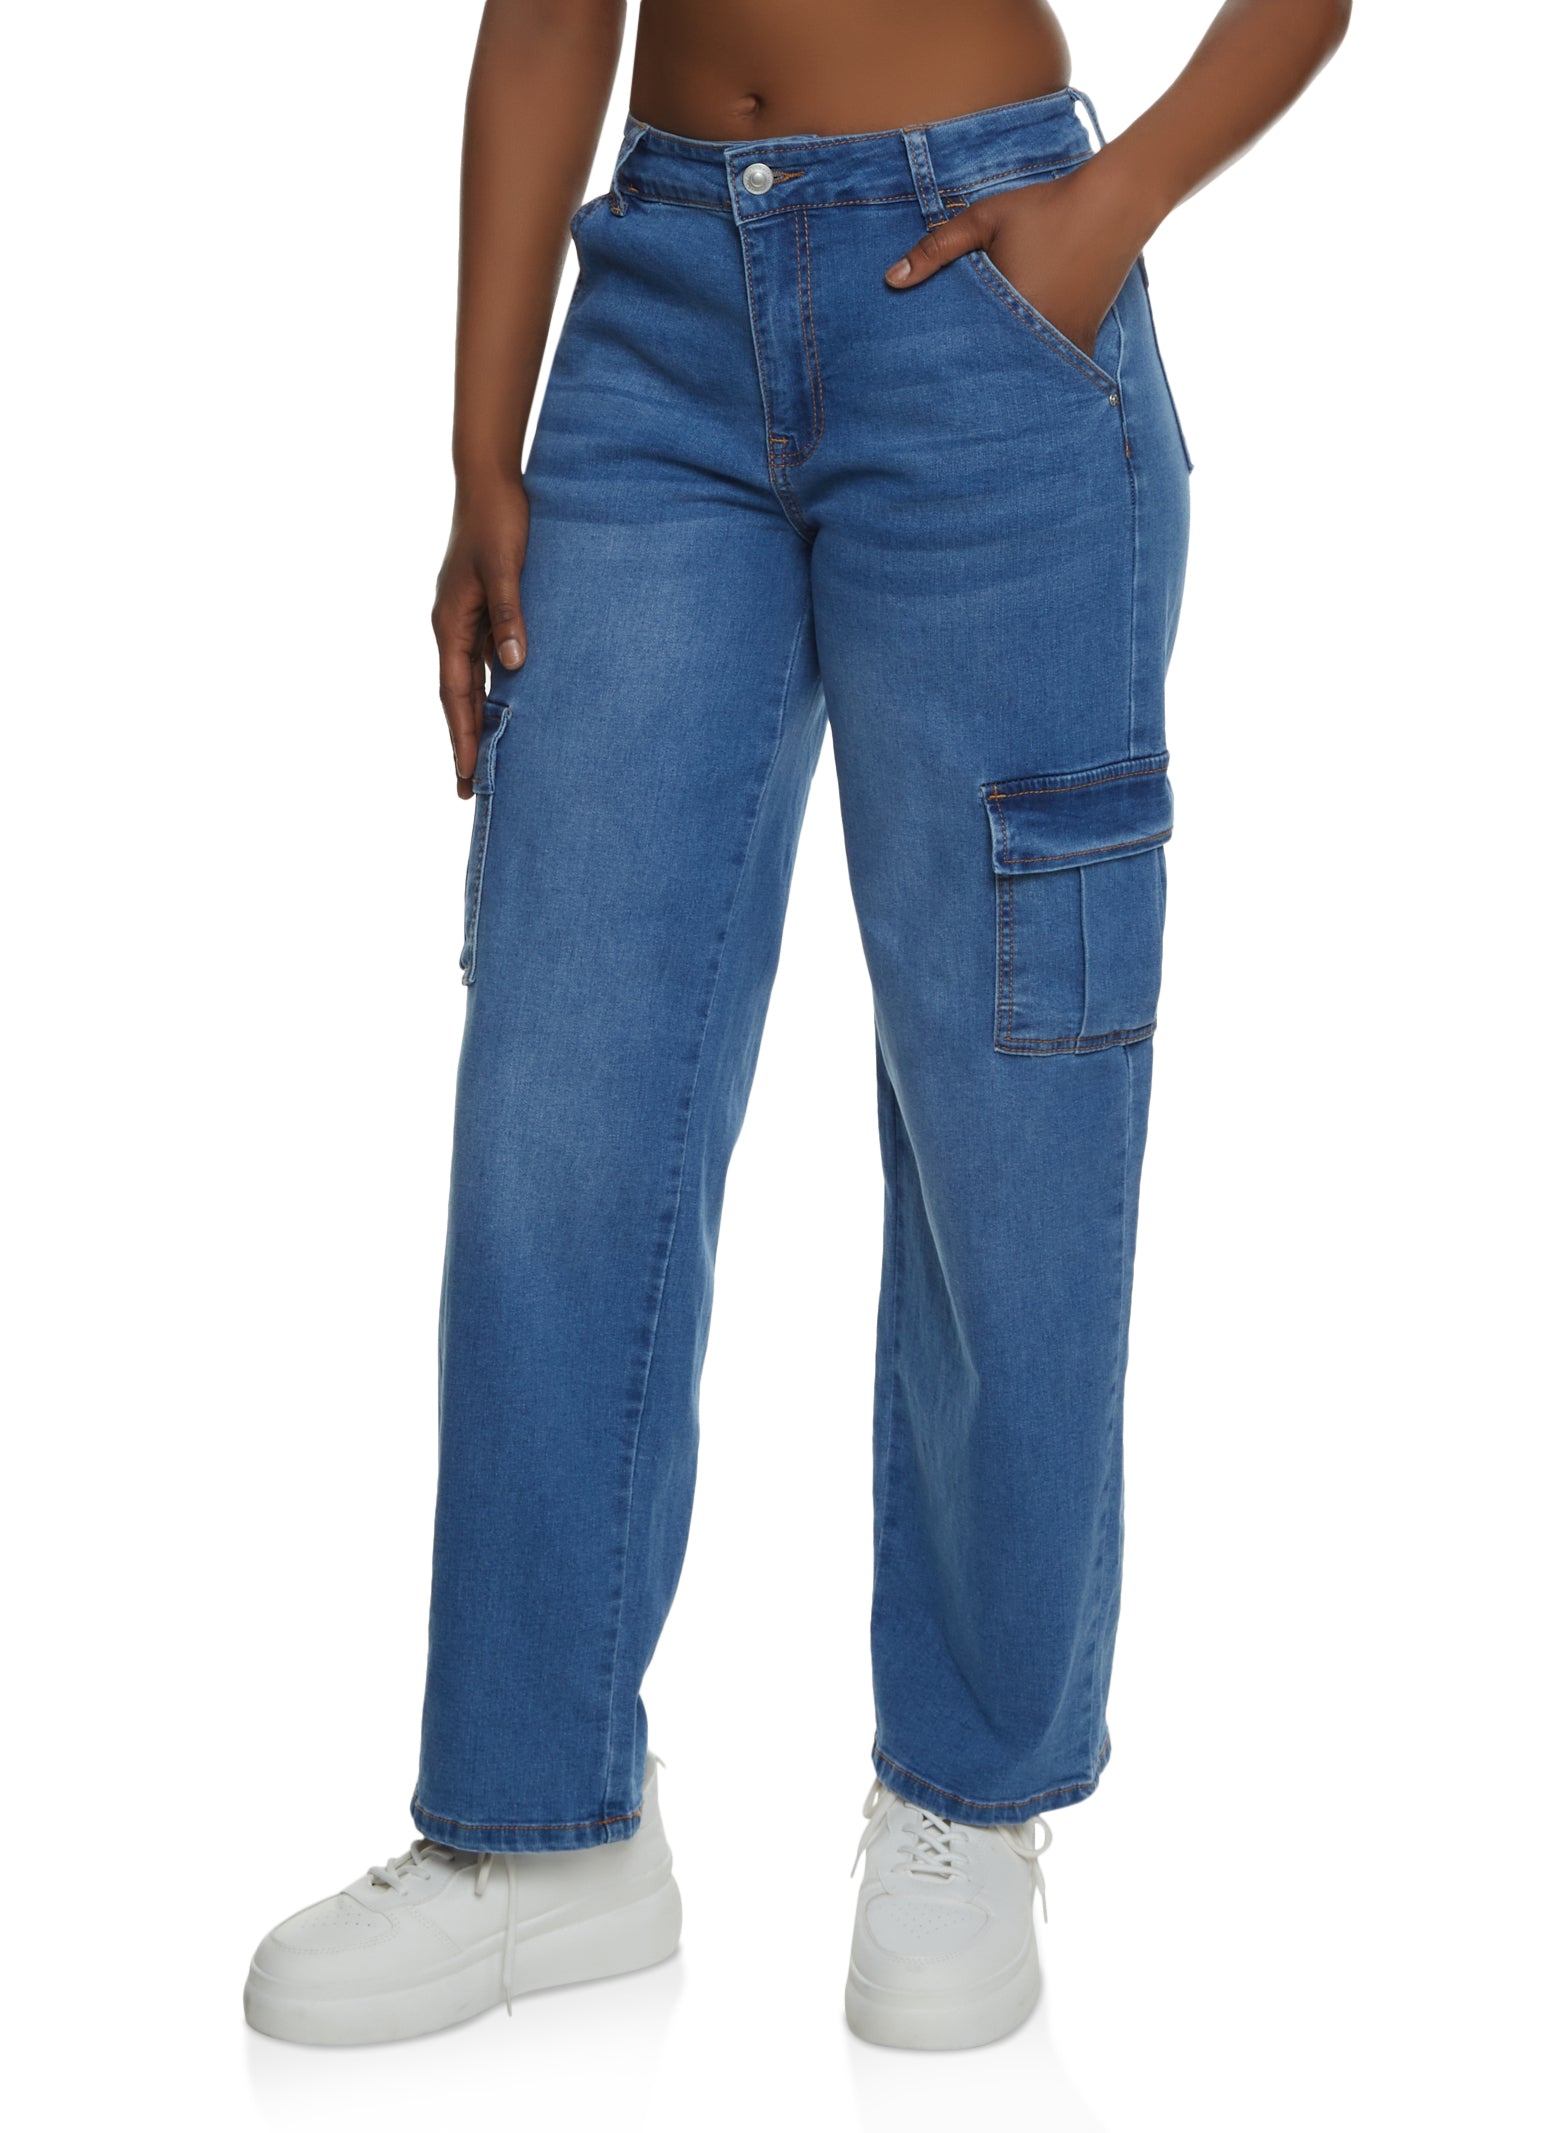 WAX Whiskered Straight Leg Cargo Jeans